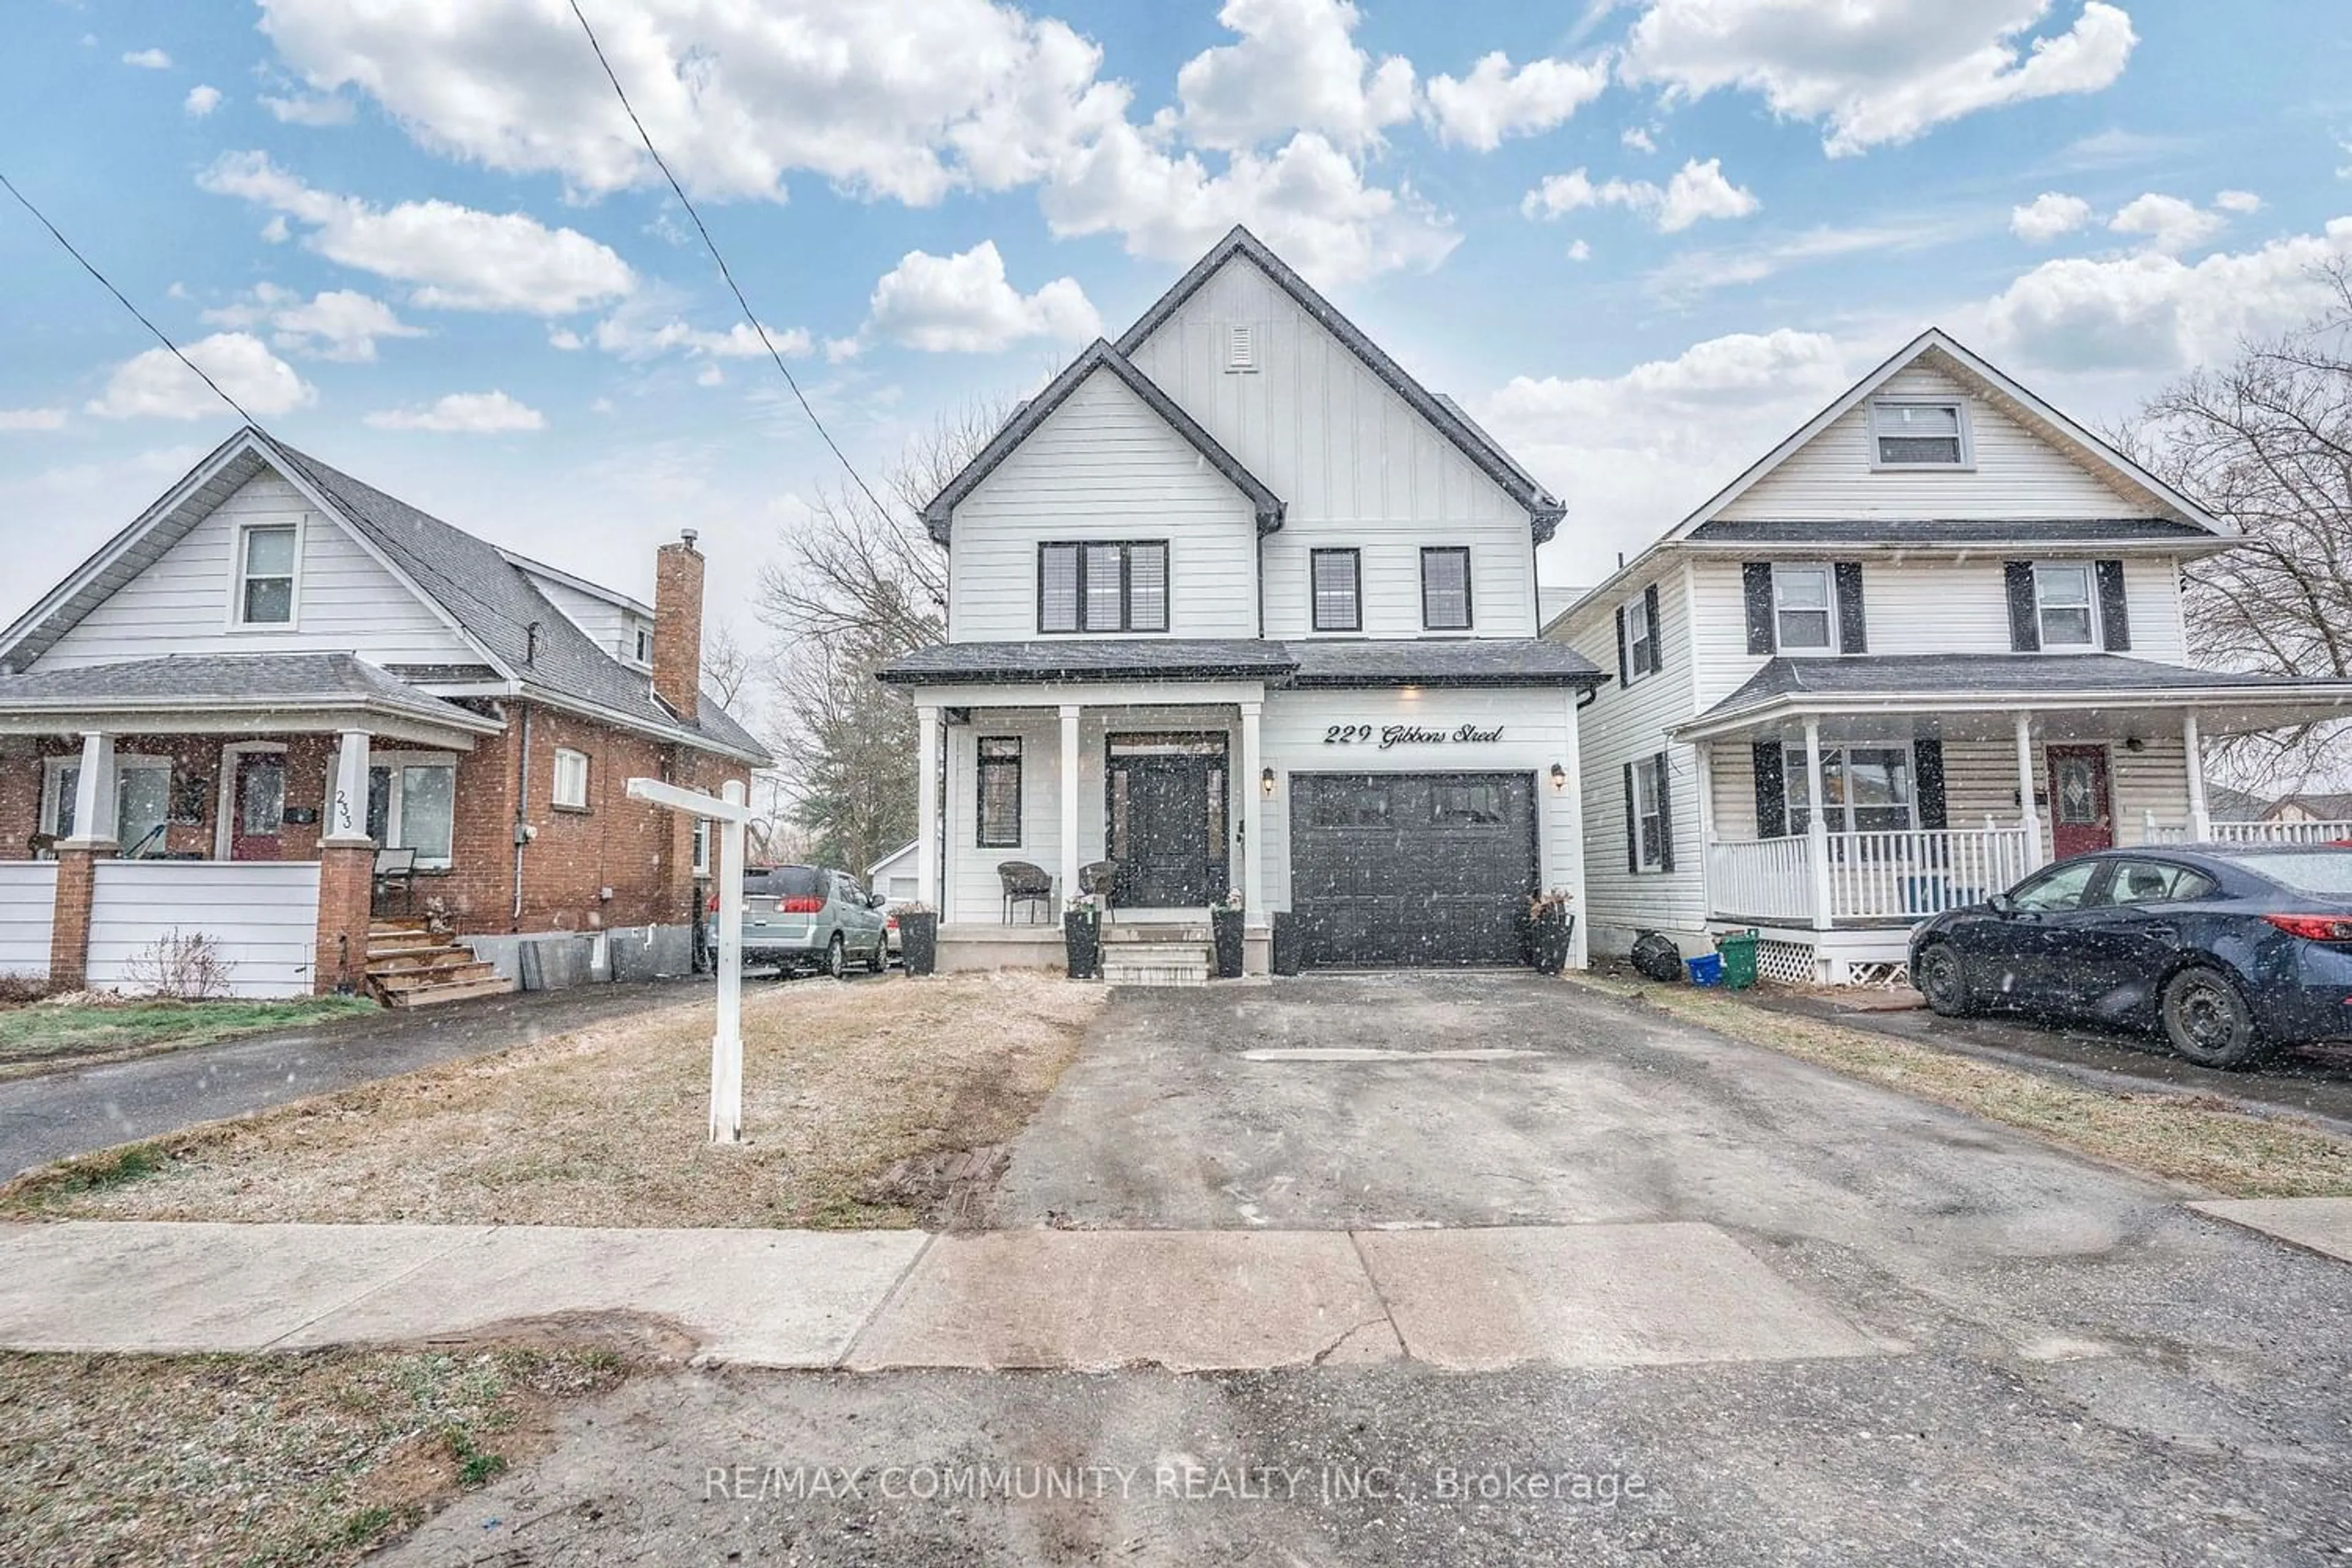 Frontside or backside of a home for 229 Gibbons St, Oshawa Ontario L1J 4Y5